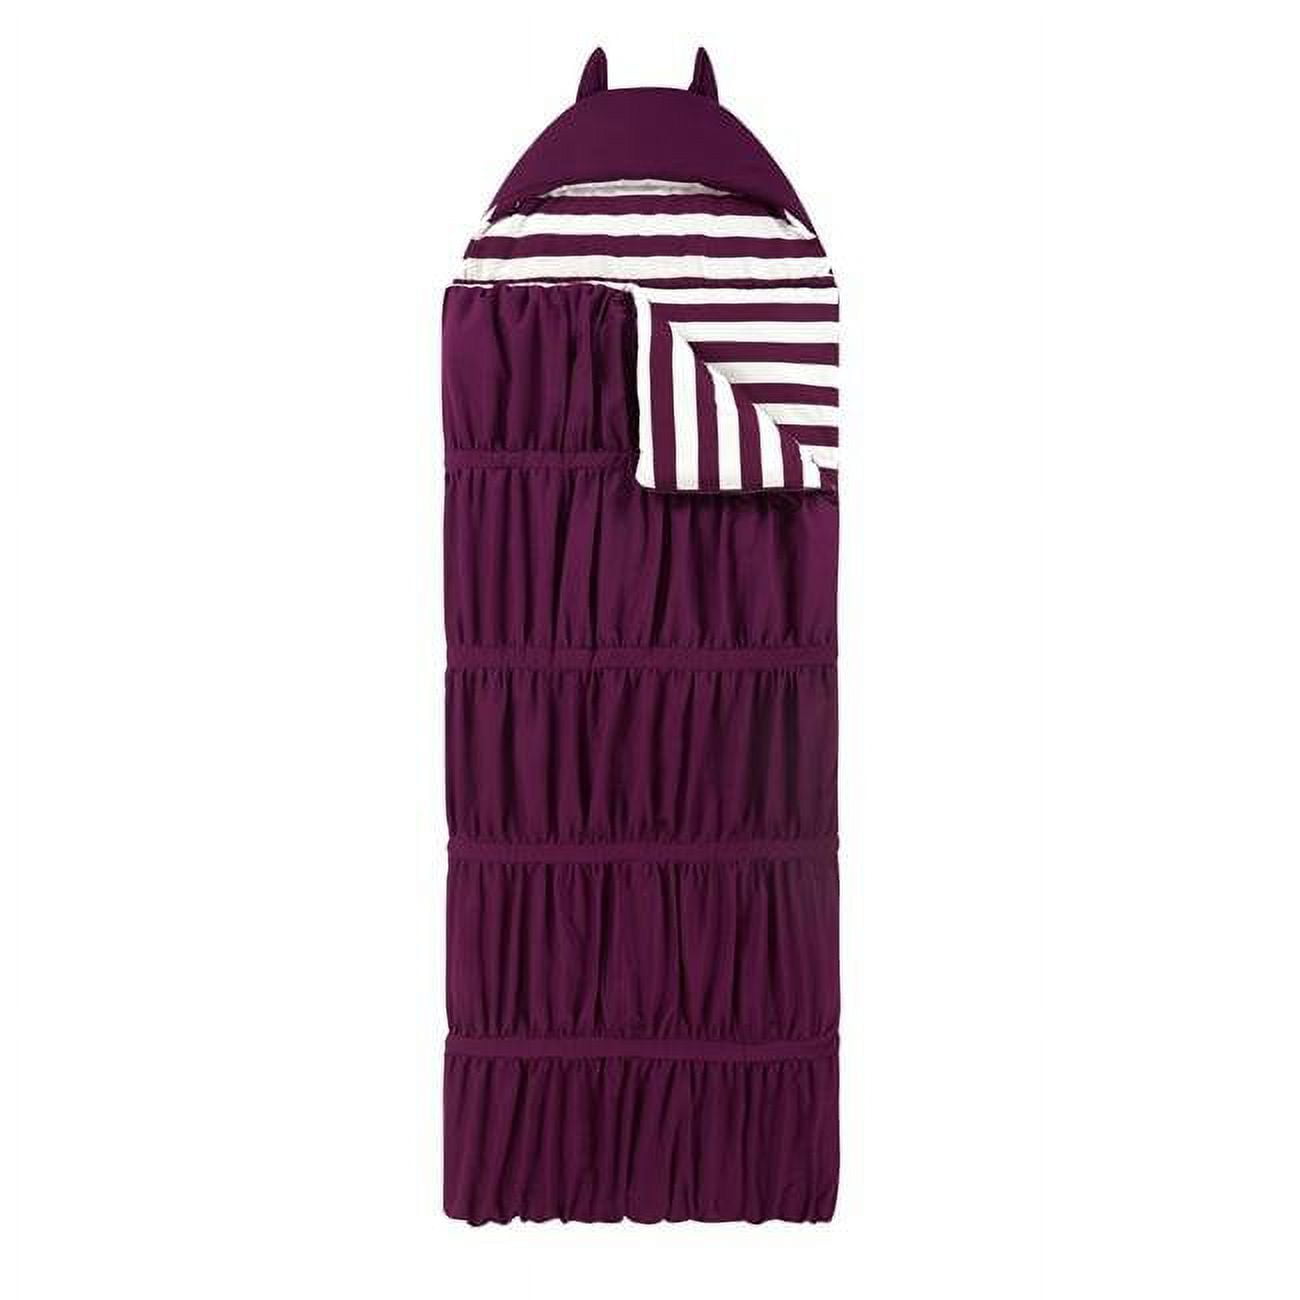 Picture of Chic Home BBG17963-US Reina Sleeping Bag with Cat Ear Hood Ruched Ruffled Design with Striped Interior for Kids&#44; Teens & Young Adults Zipper Closure&#44; 32 x 75 in. - Purple & White